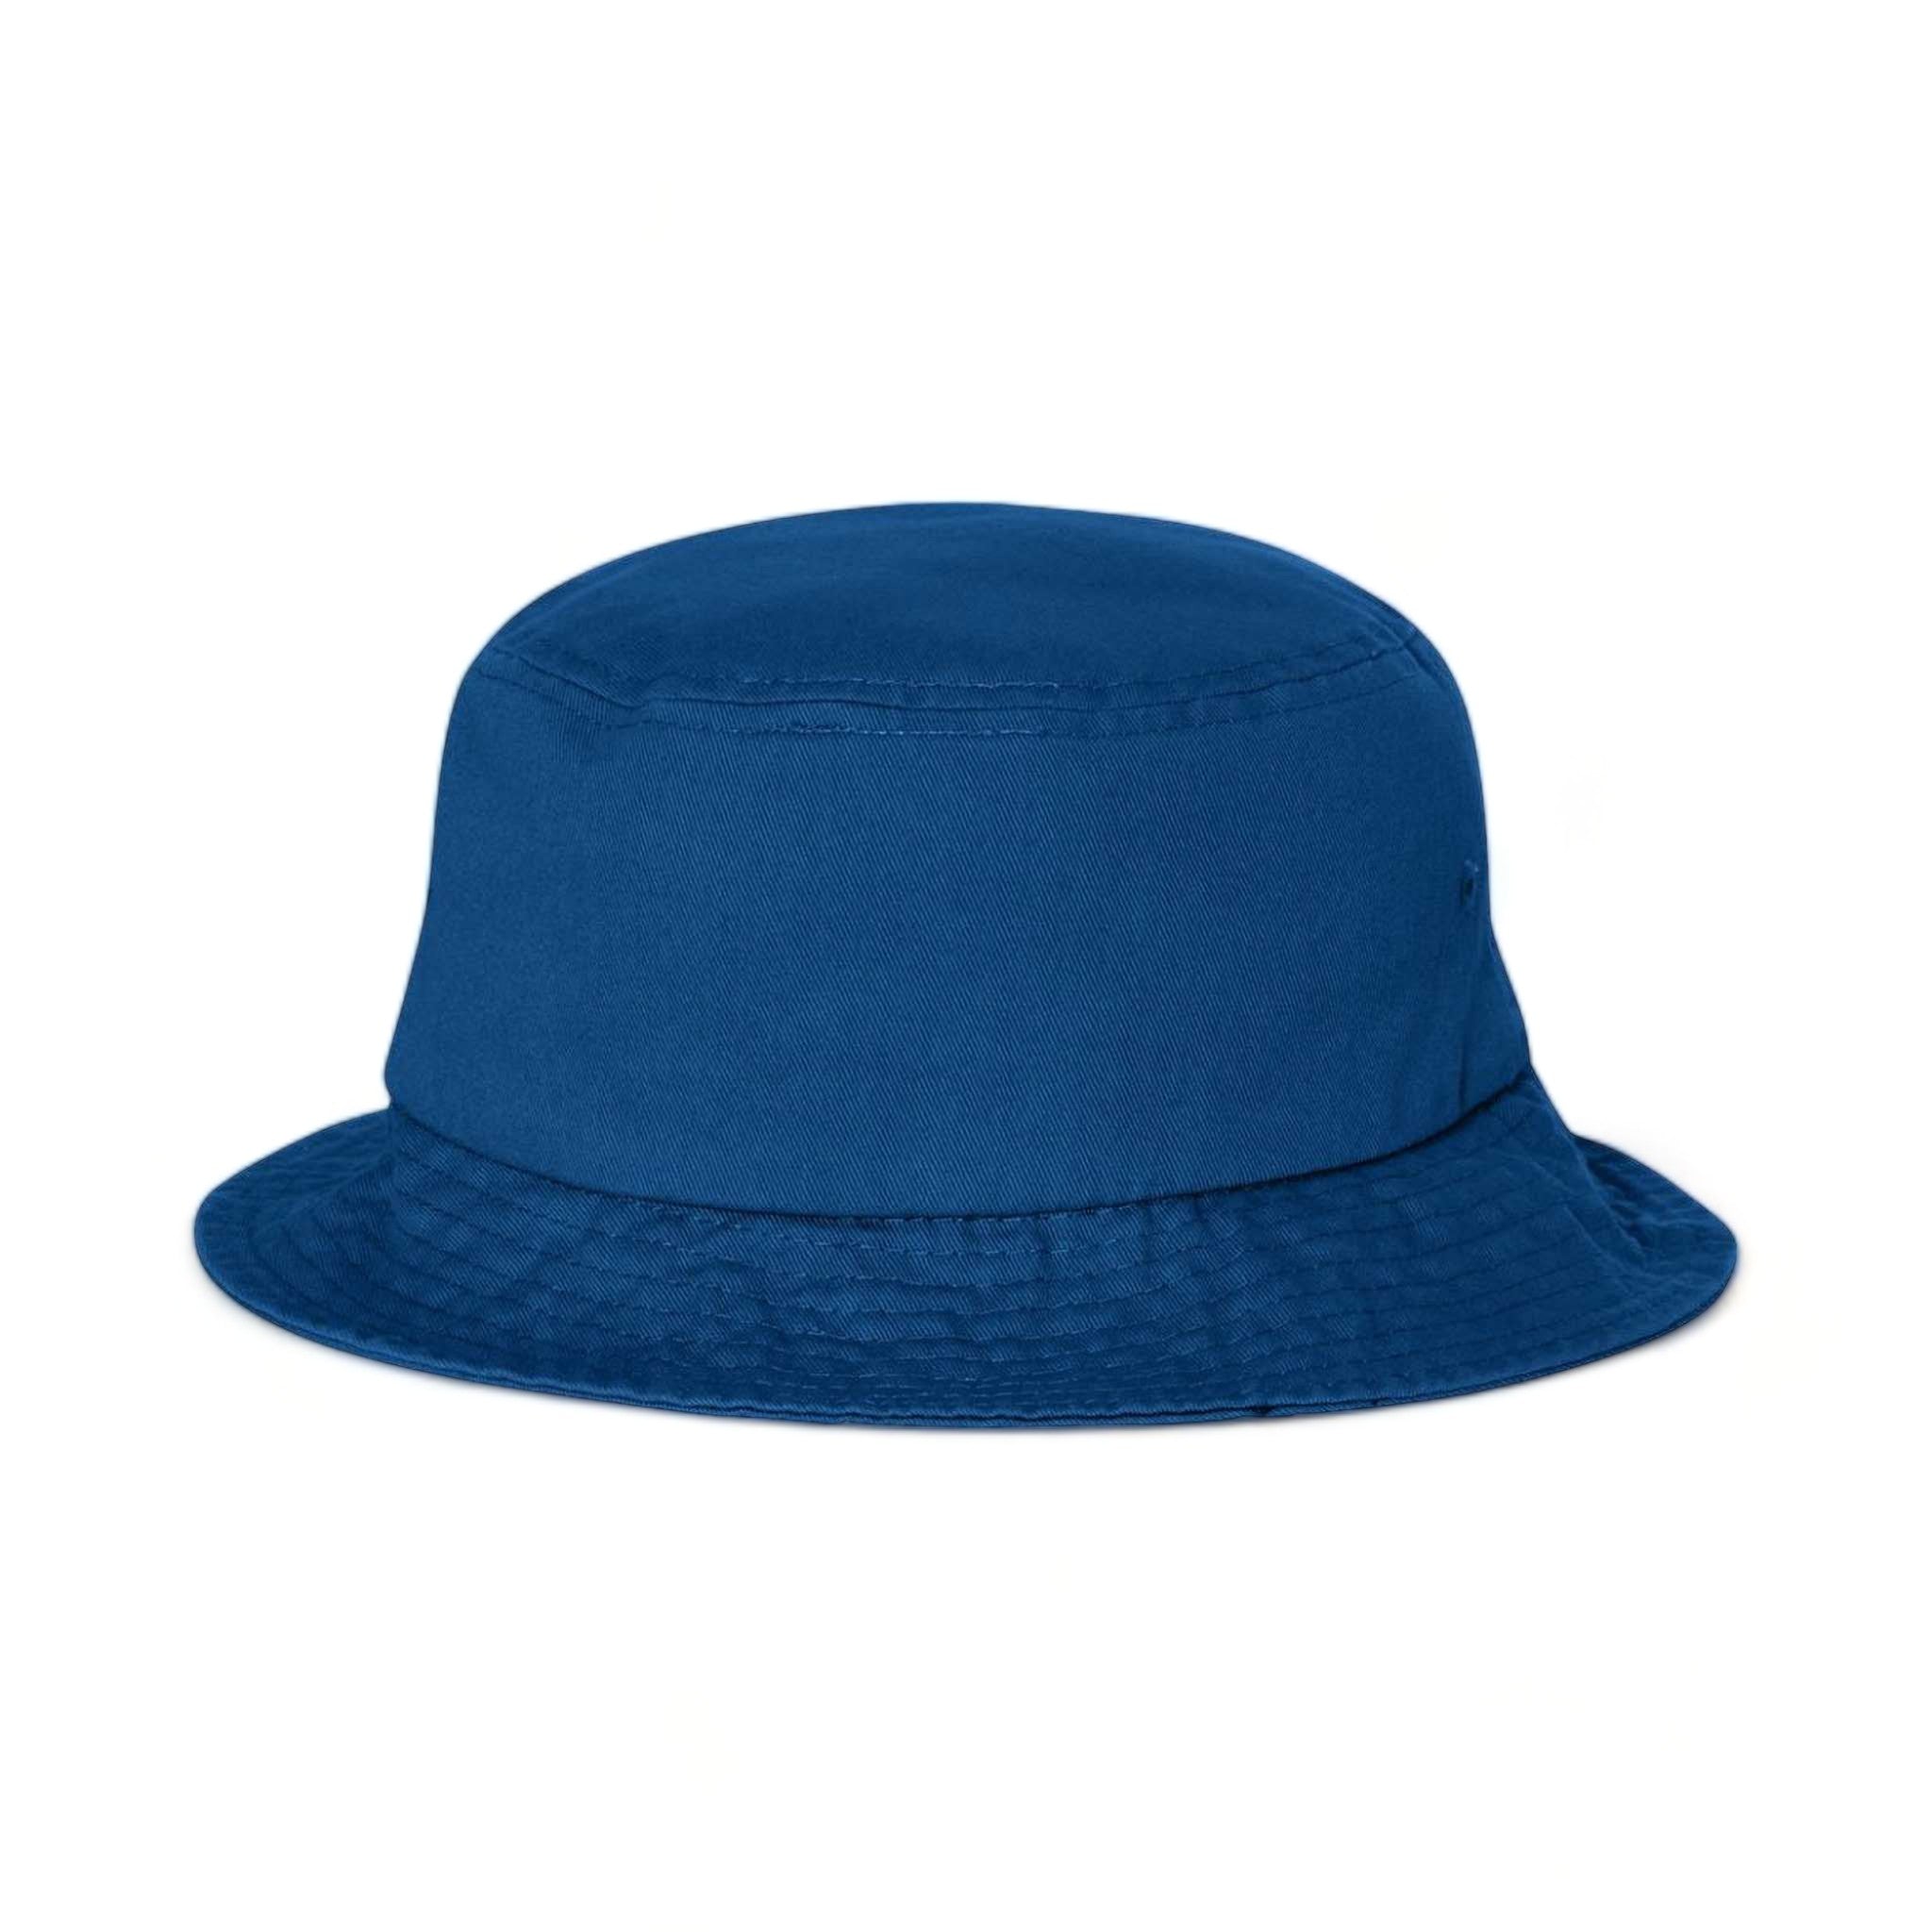 Front view of Sportsman 2050 custom hat in royal blue